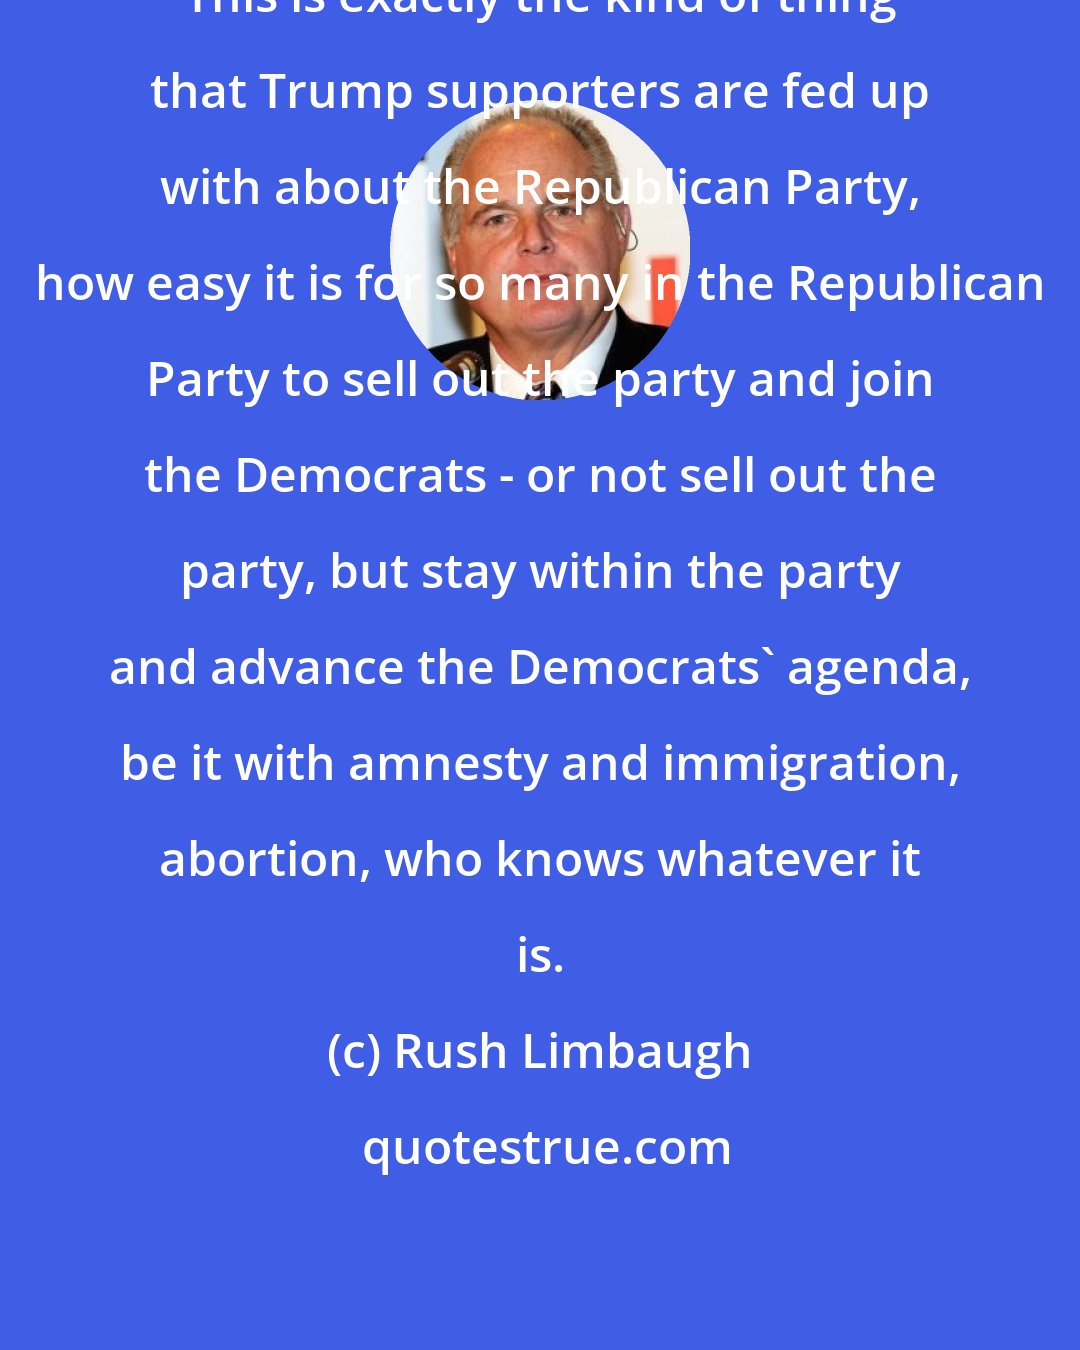 Rush Limbaugh: This is exactly the kind of thing that Trump supporters are fed up with about the Republican Party, how easy it is for so many in the Republican Party to sell out the party and join the Democrats - or not sell out the party, but stay within the party and advance the Democrats' agenda, be it with amnesty and immigration, abortion, who knows whatever it is.